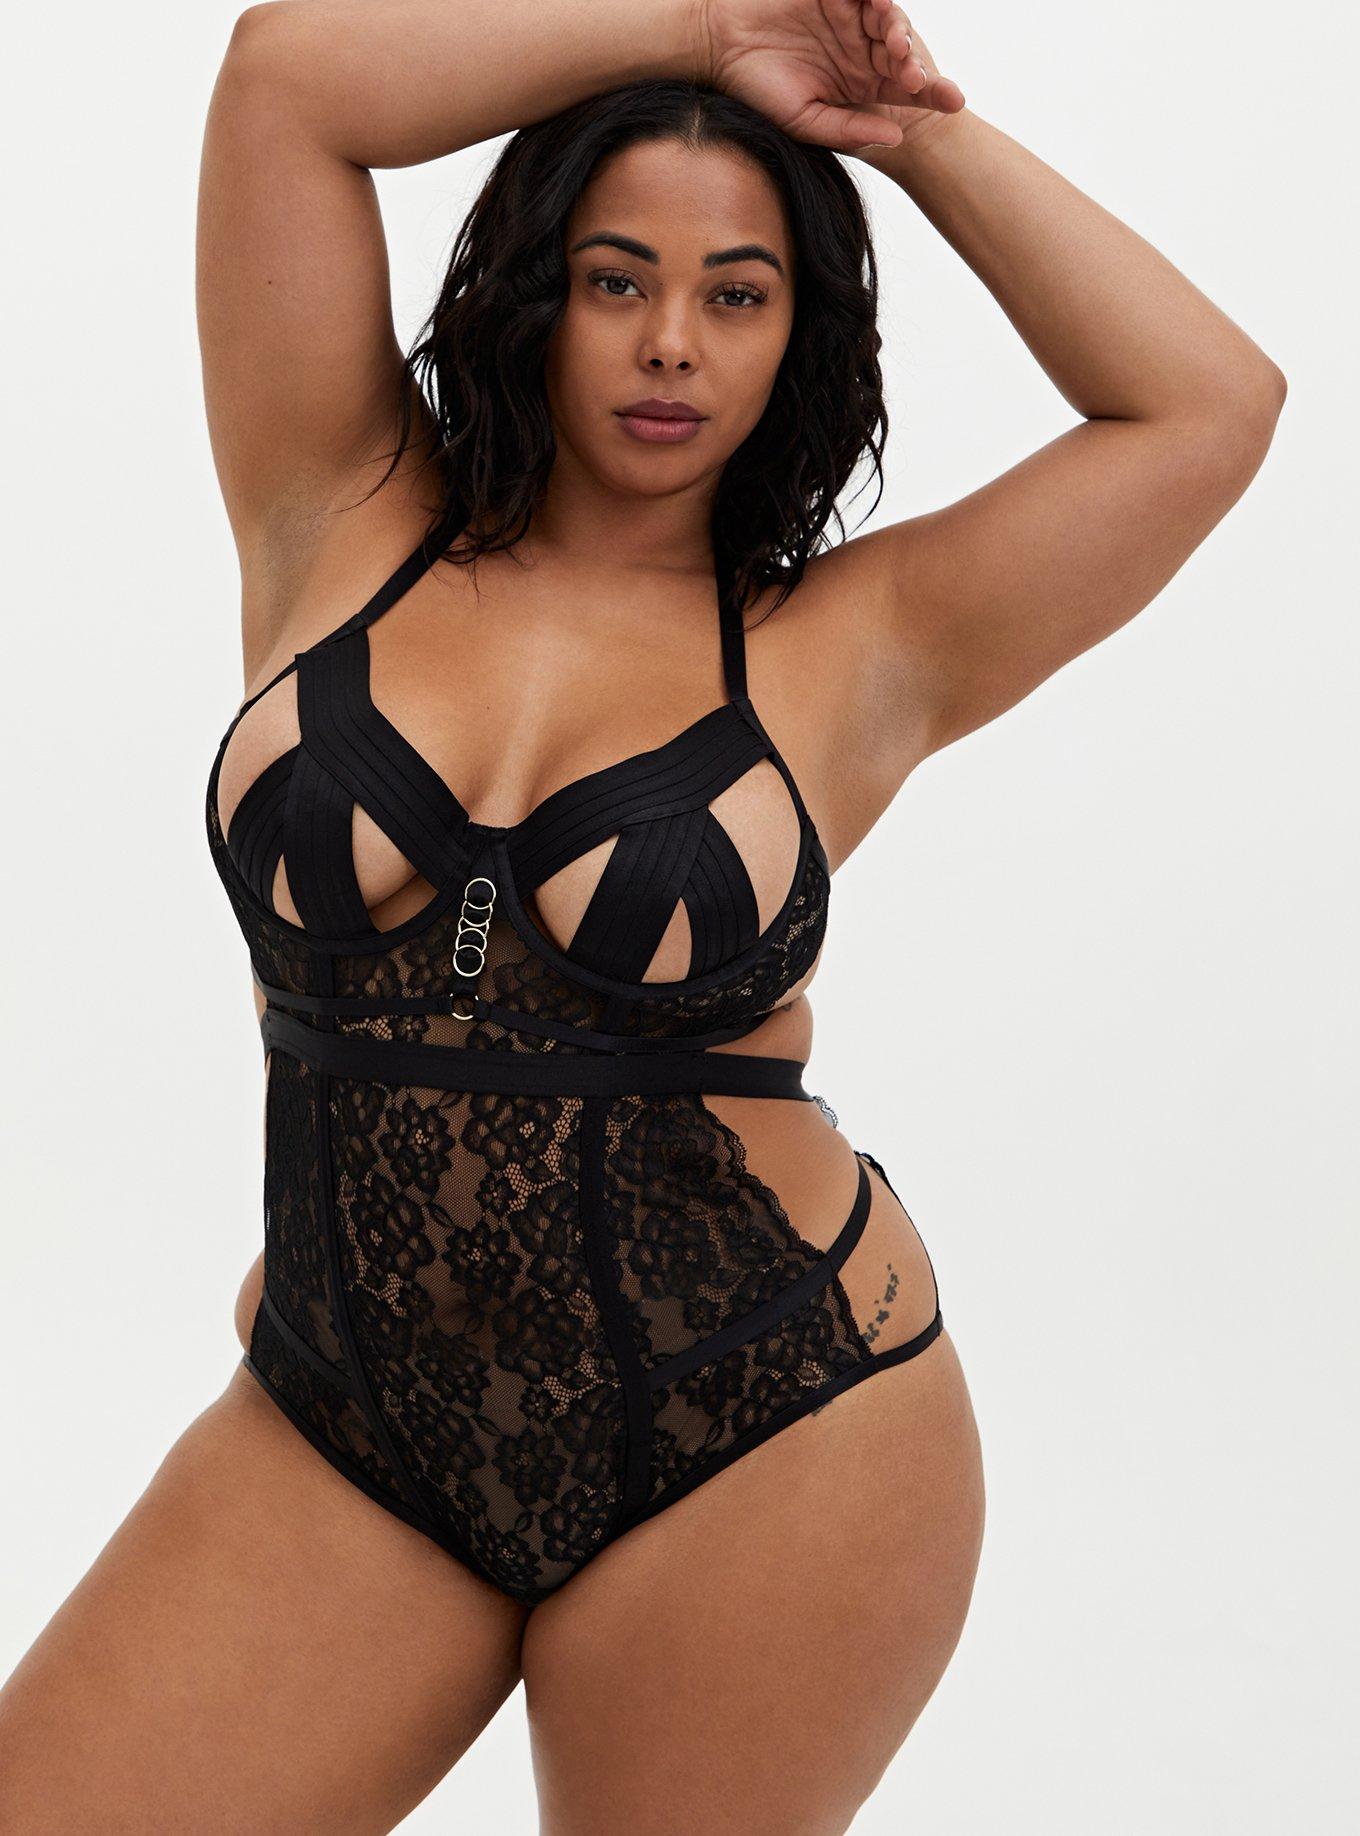 sexy BE WICKED harness STRAPPY lace CUTOUT caged CHEEKY bodysuit TEDDY  romper